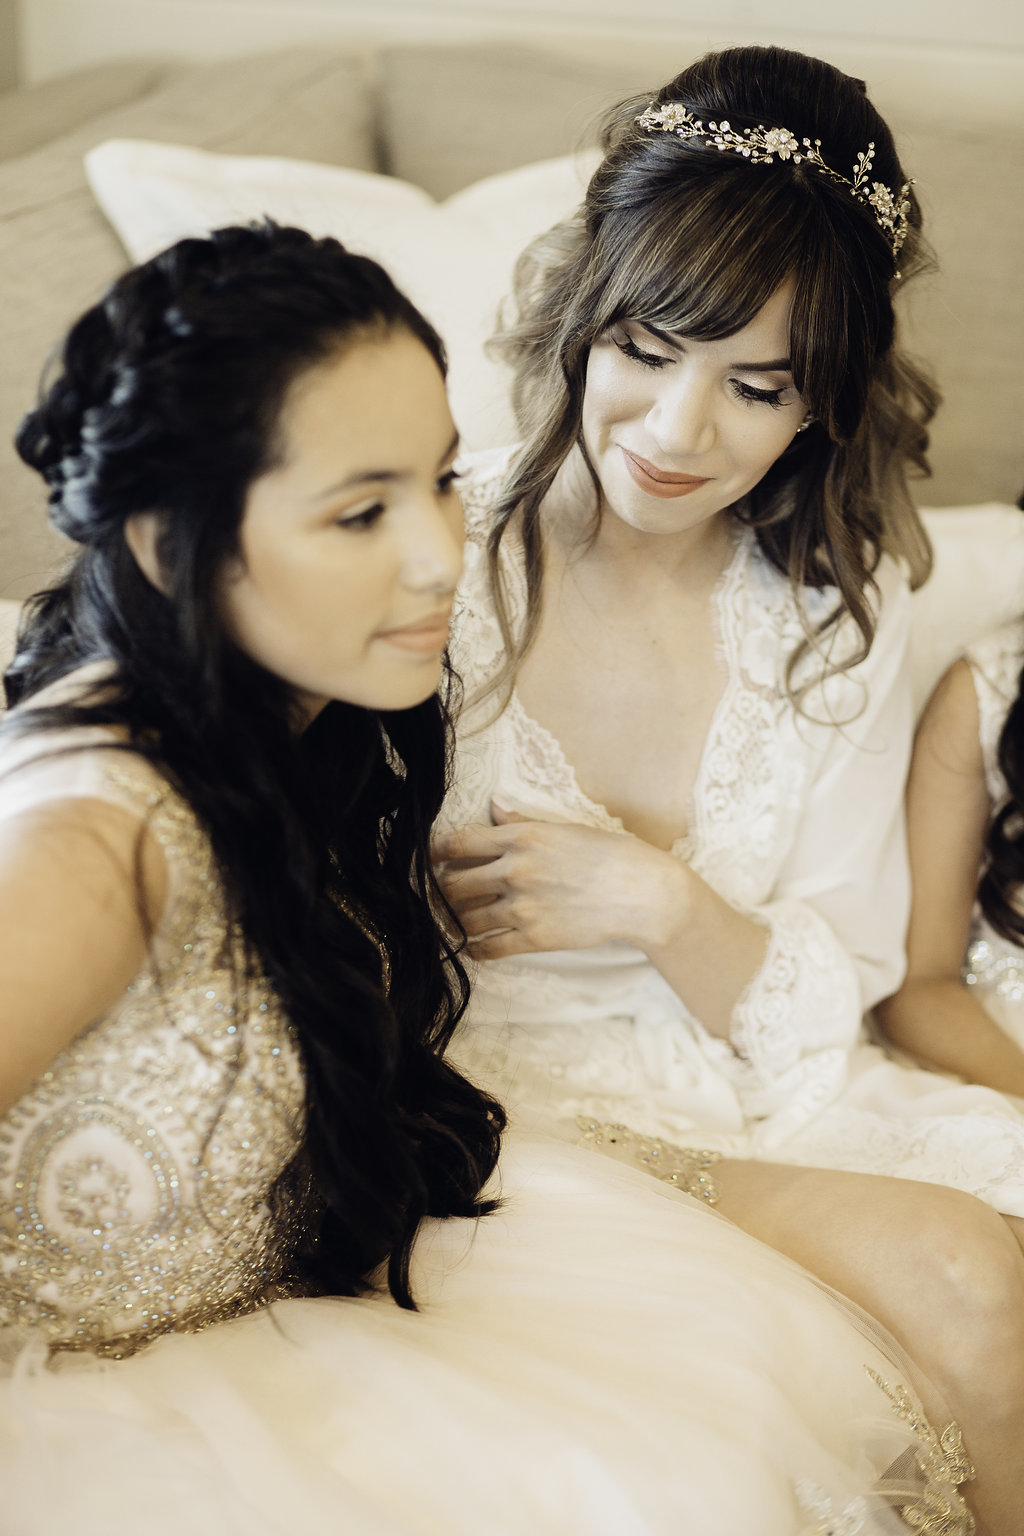 Wedding Photograph Of Woman Touching a Woman's Hair Los Angeles